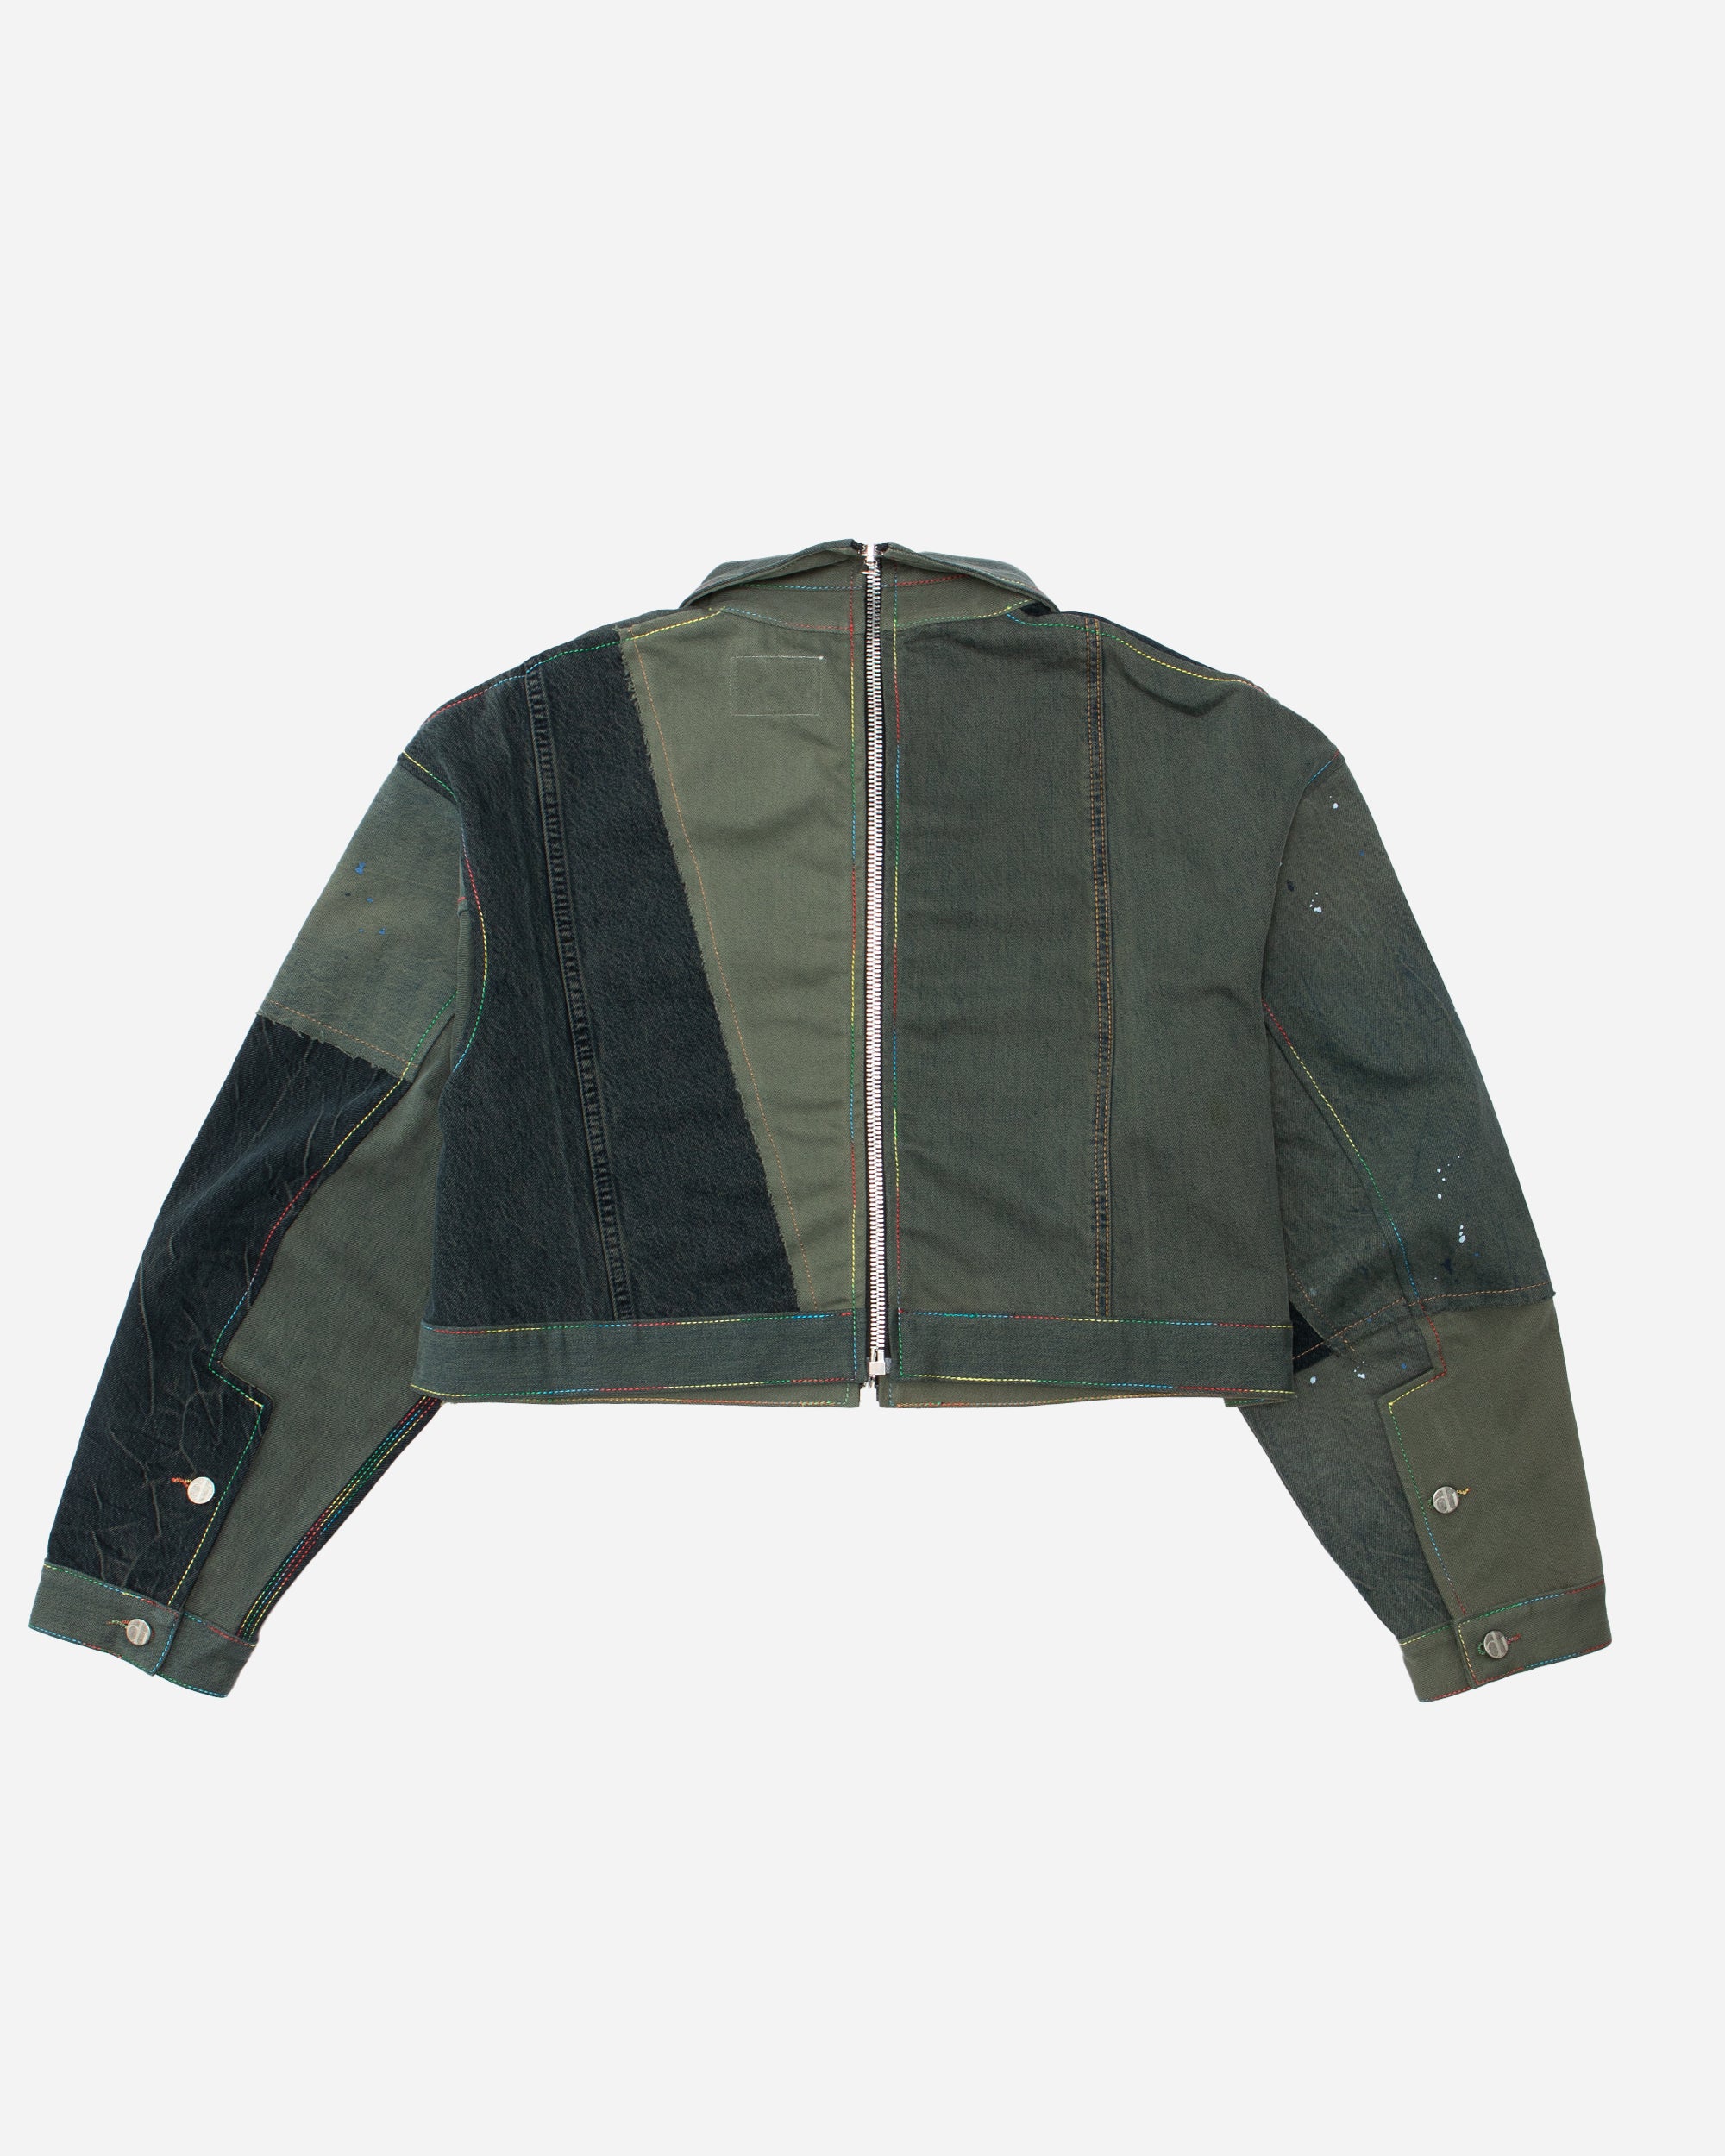 (di)vision Upcycled Cropped Denim Jacket BURNT OLIVE 20SS23